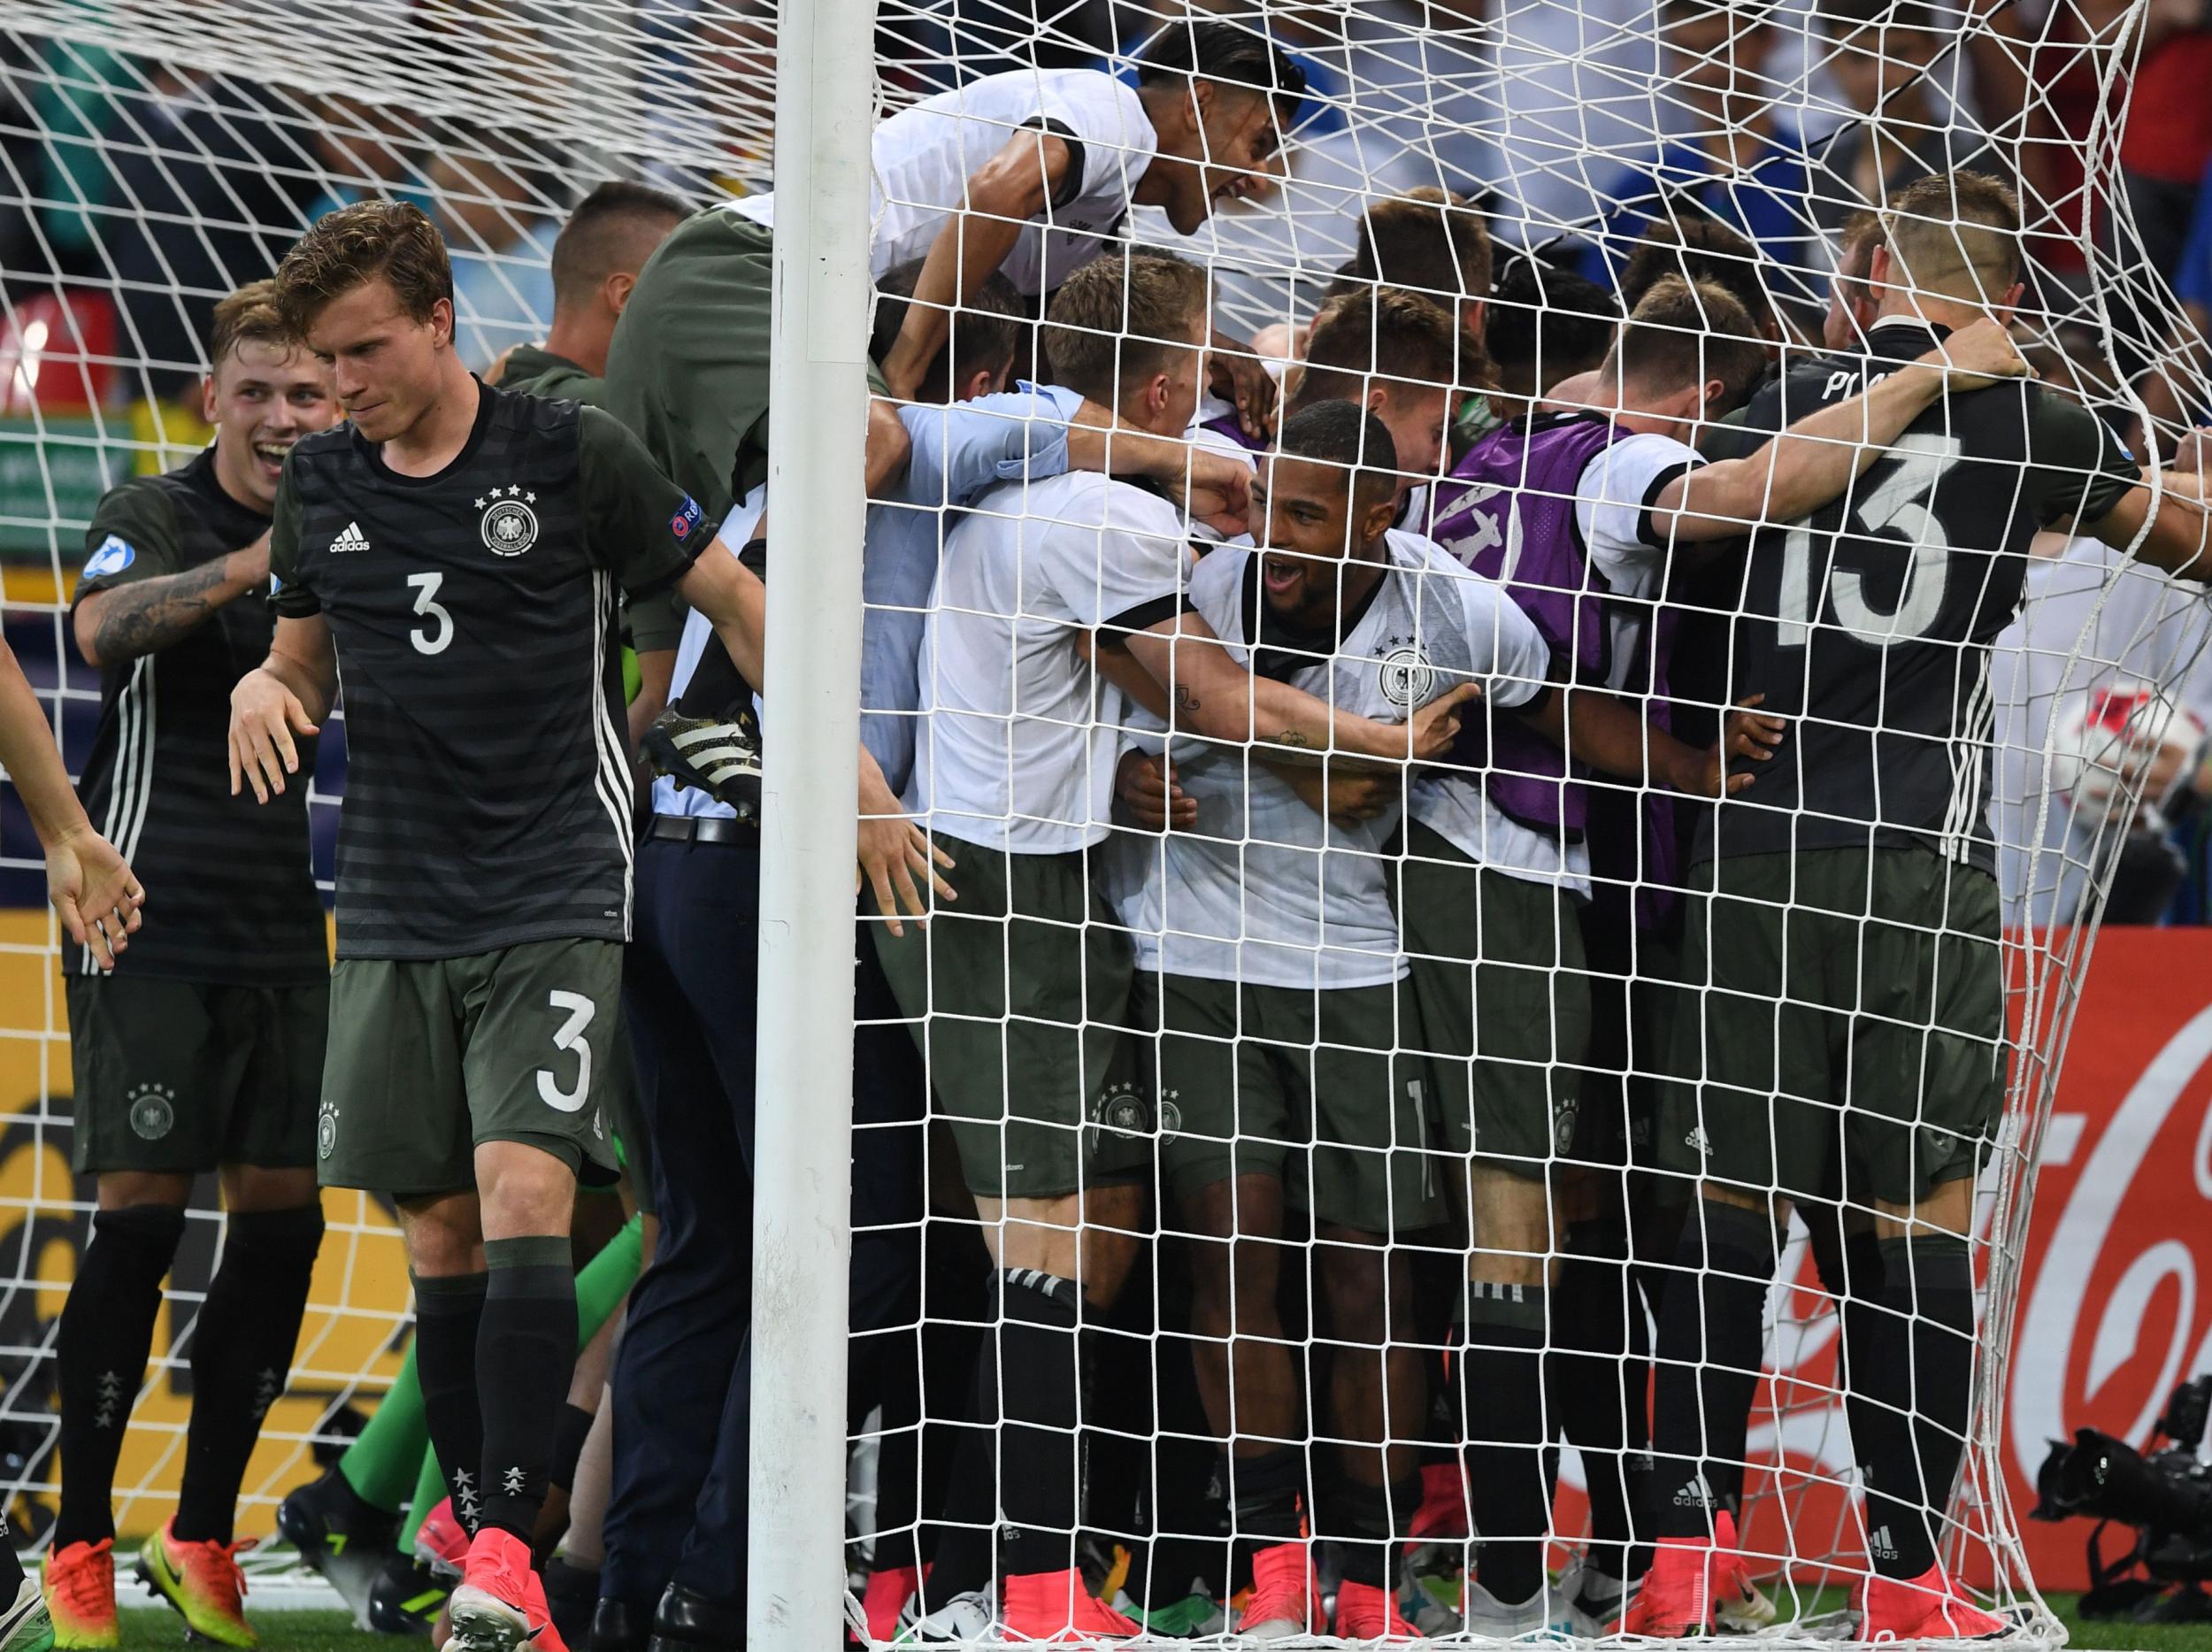 Germany knocked out England on penalties